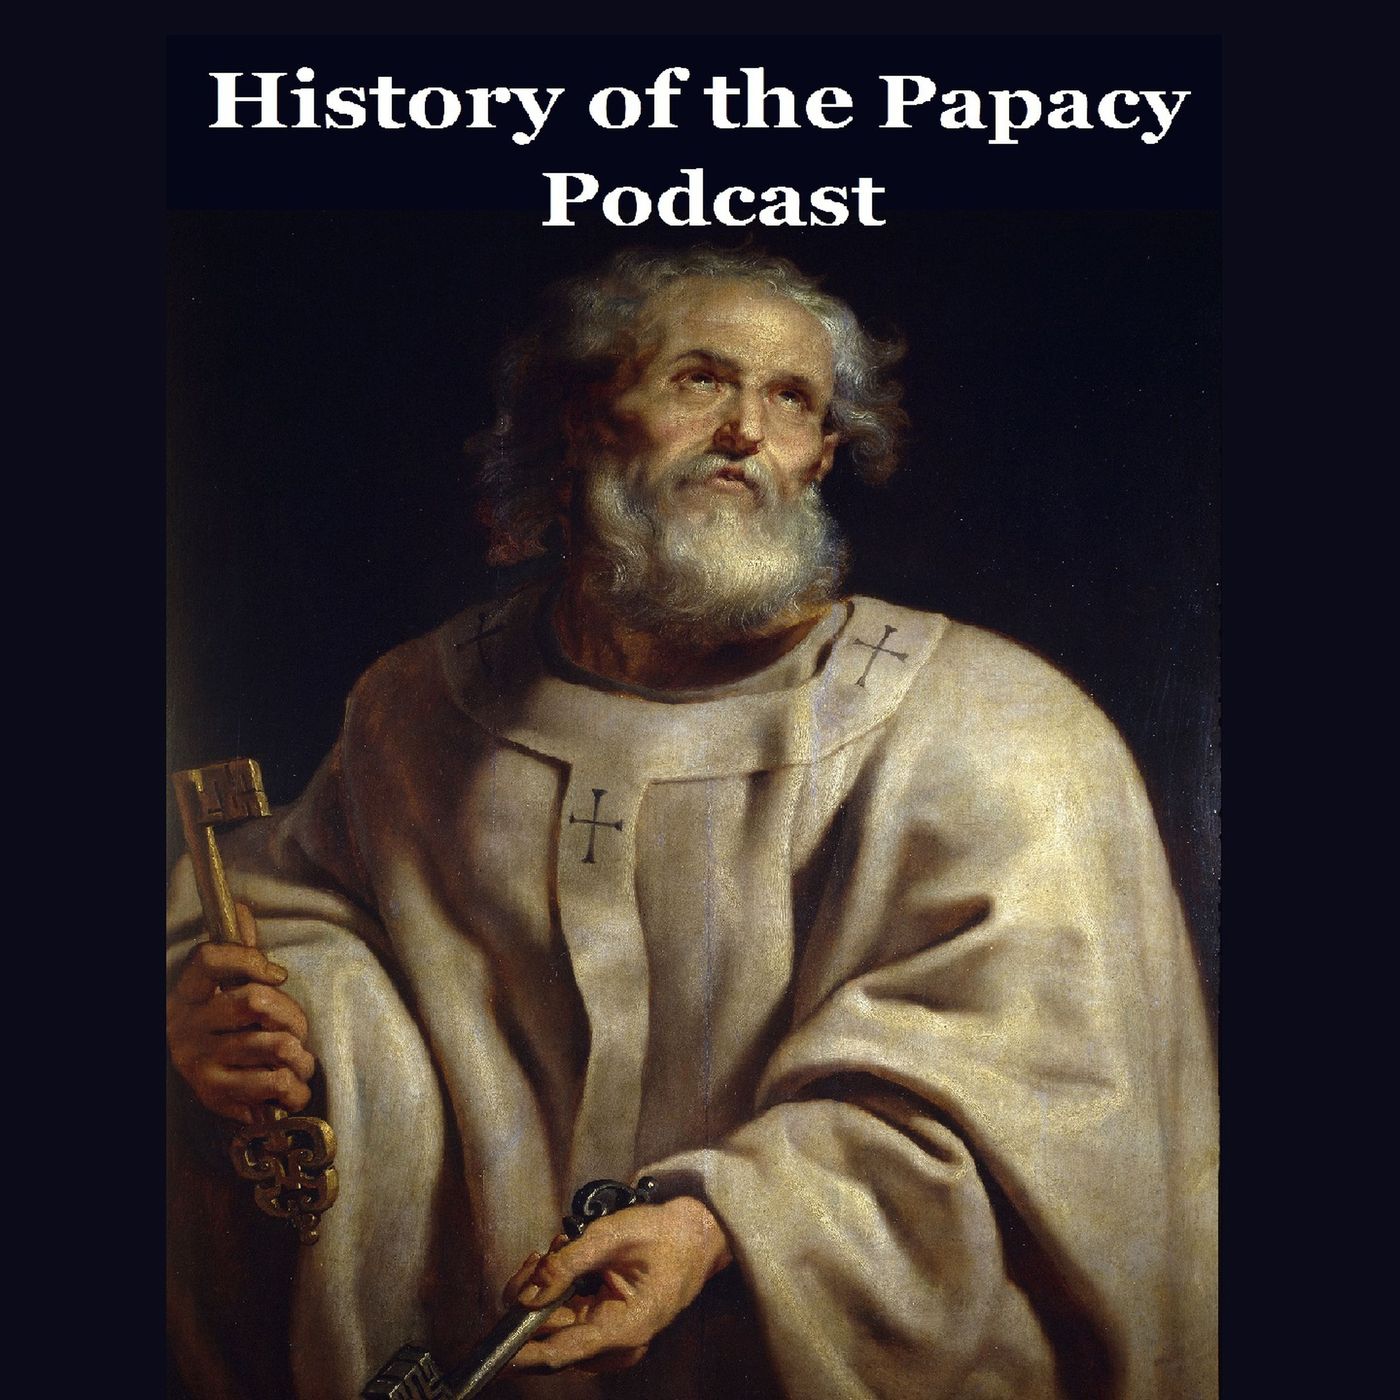 Episode 30: The First Council of Nicaea Part 4, Arianism